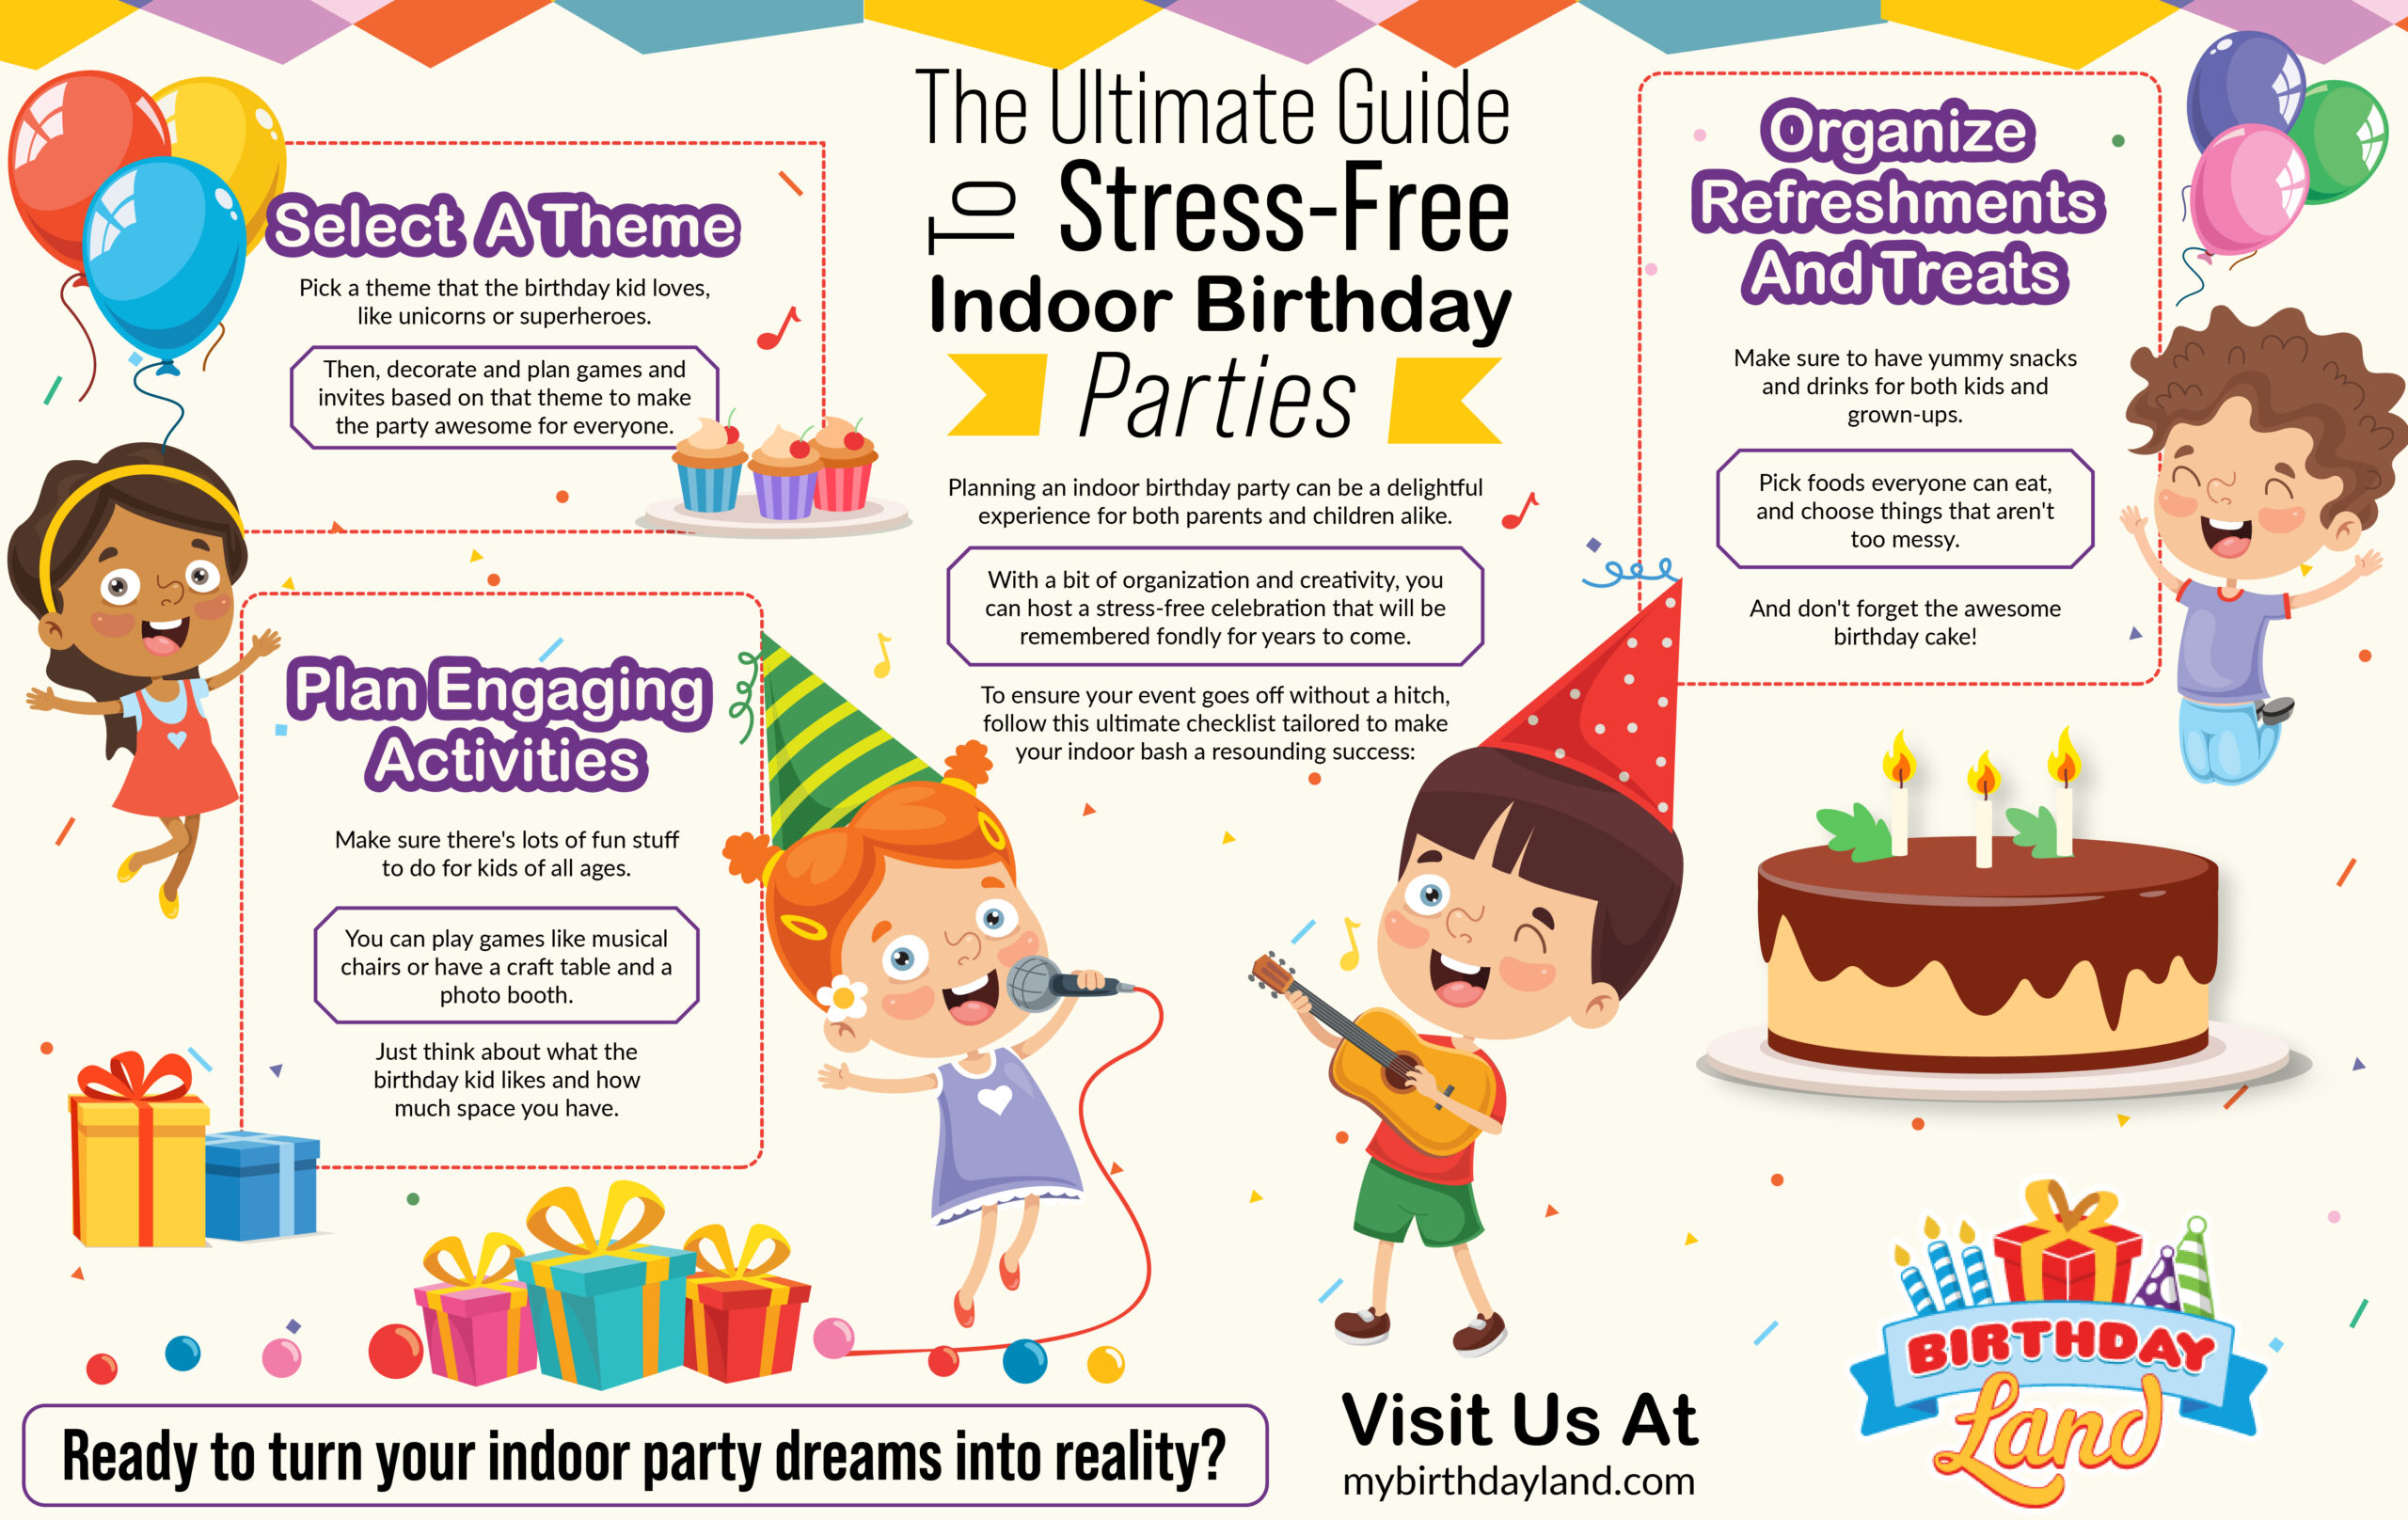 The Ultimate Guide to Stress-Free Indoor Birthday Parties